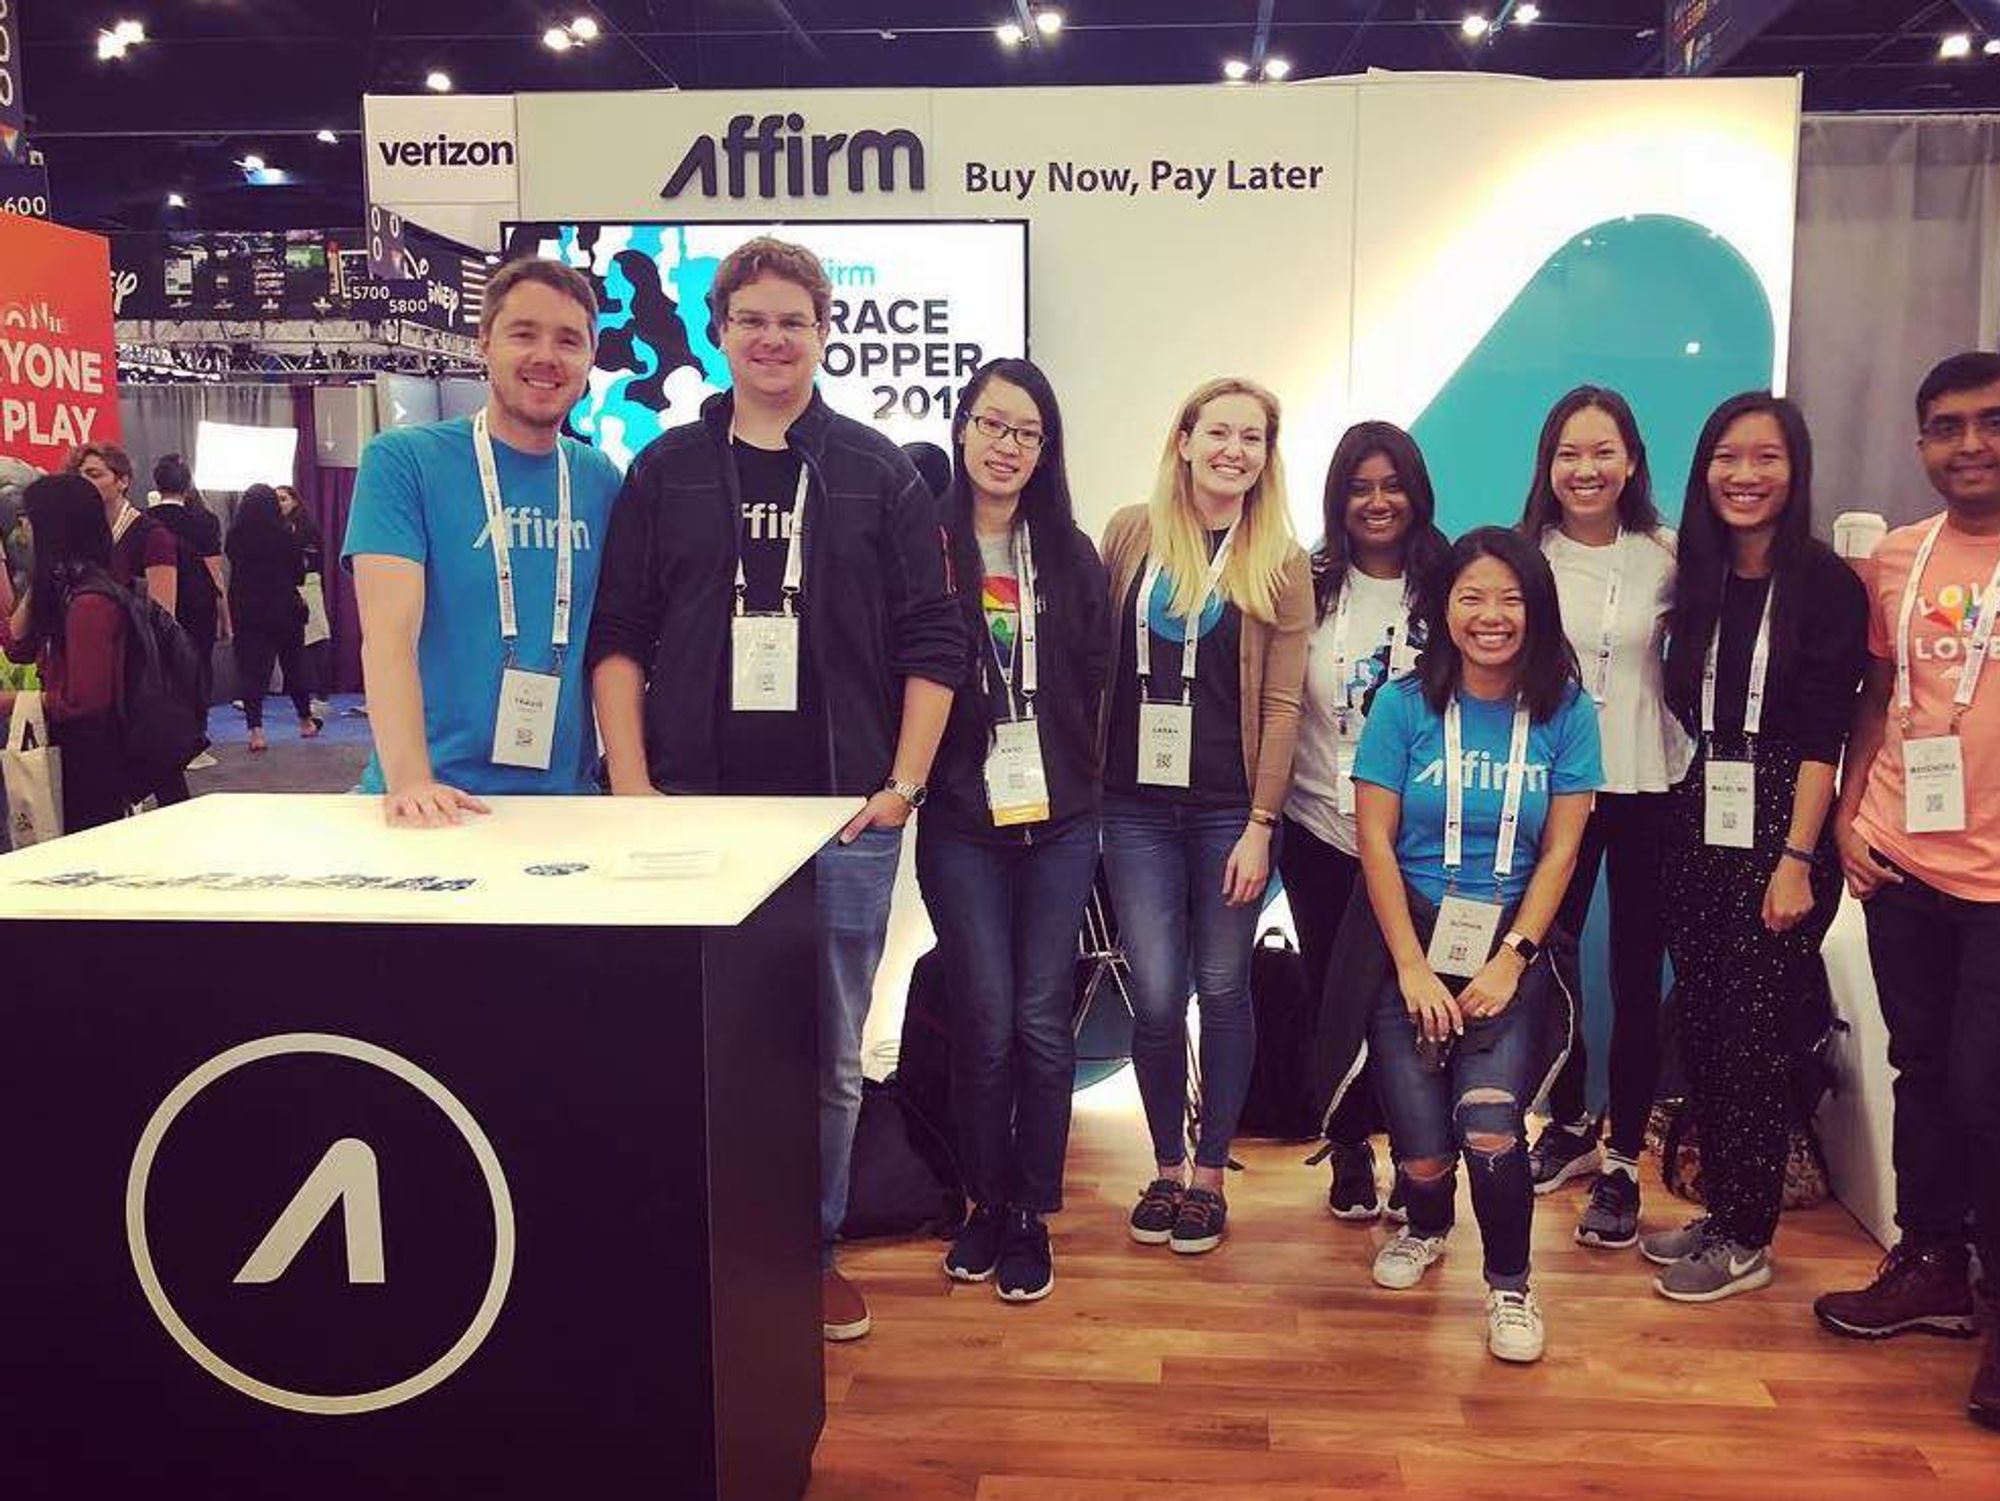 Affirm employees pose for a photo at a conference.